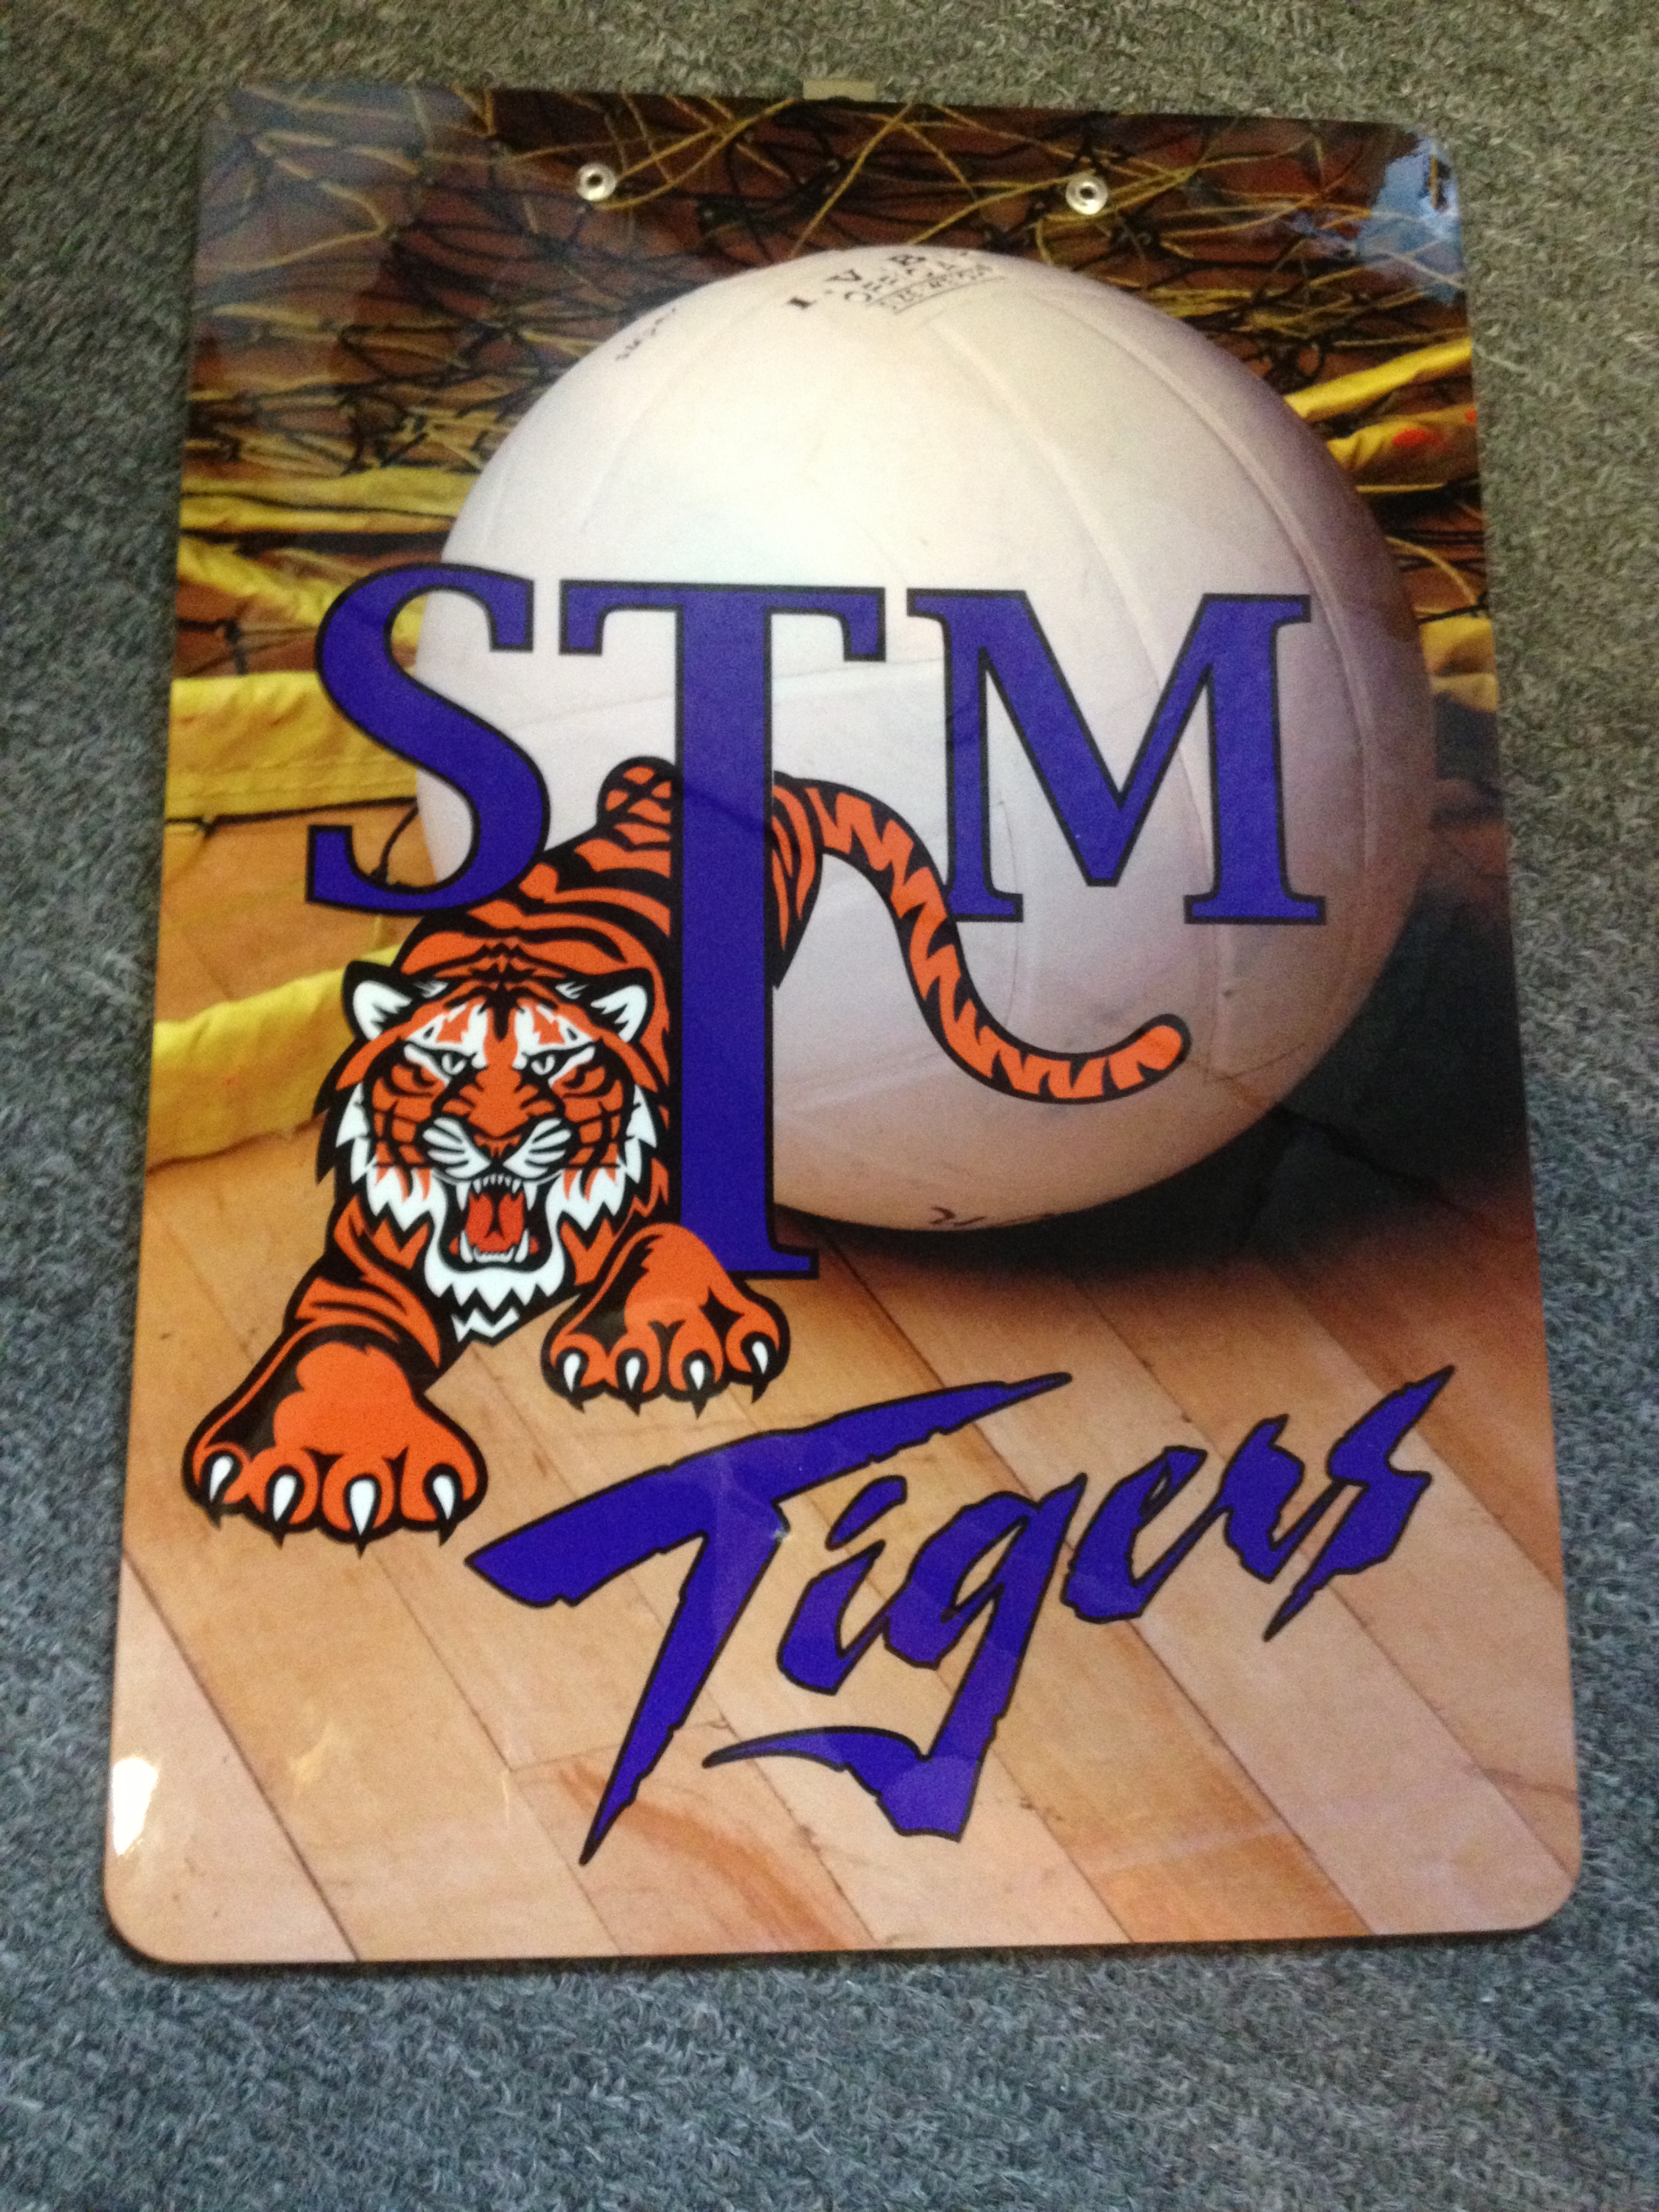 Clipboard made with sublimation printing